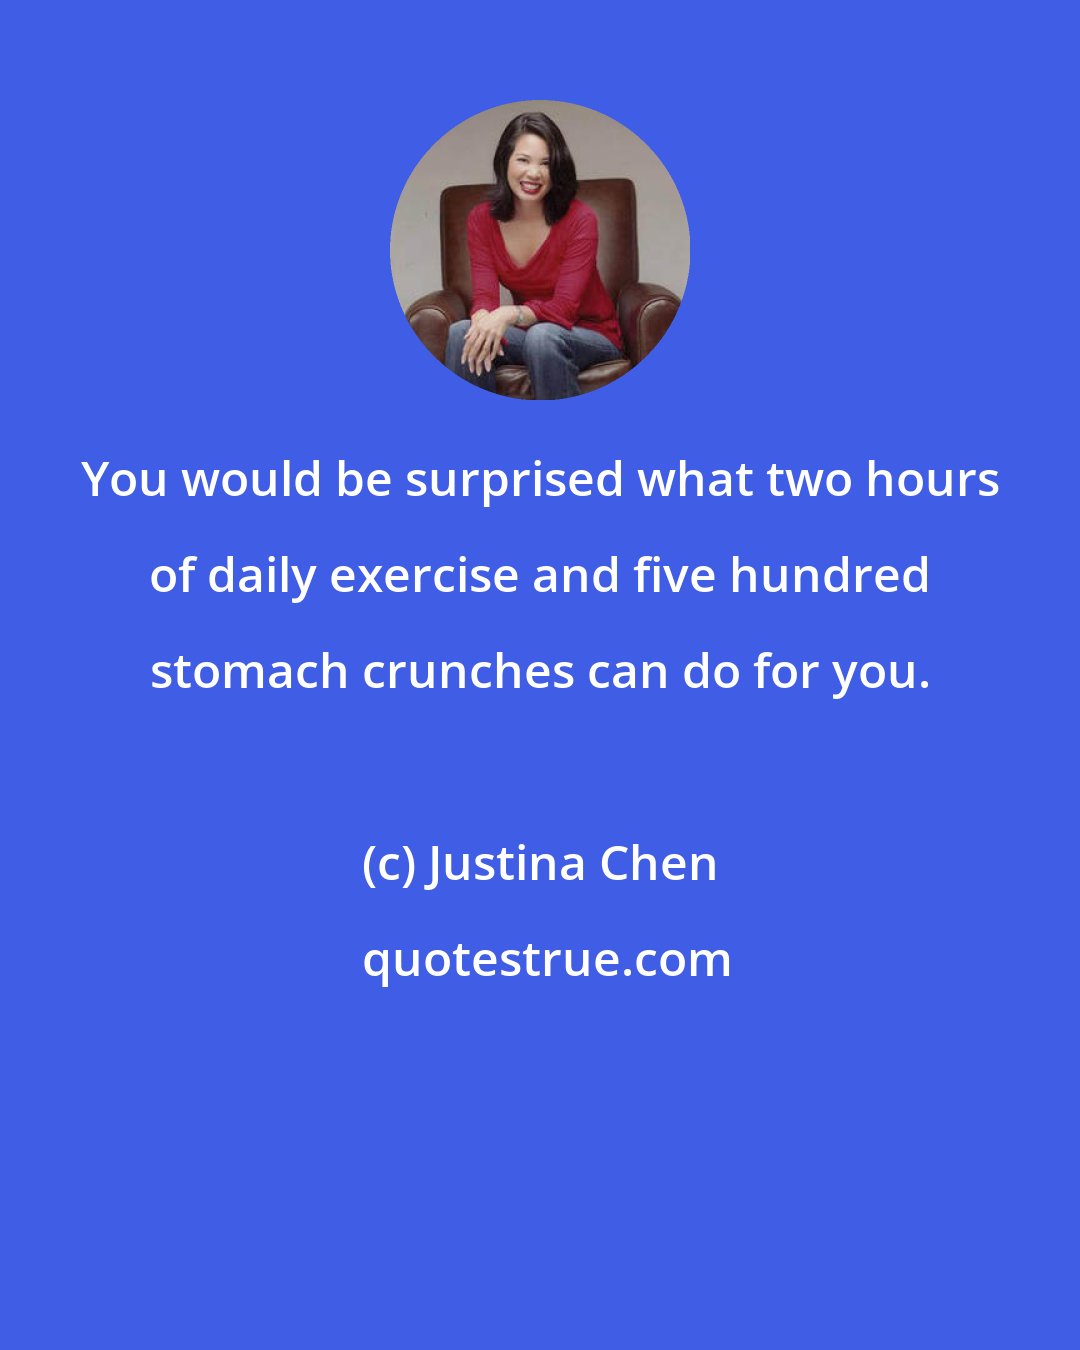 Justina Chen: You would be surprised what two hours of daily exercise and five hundred stomach crunches can do for you.